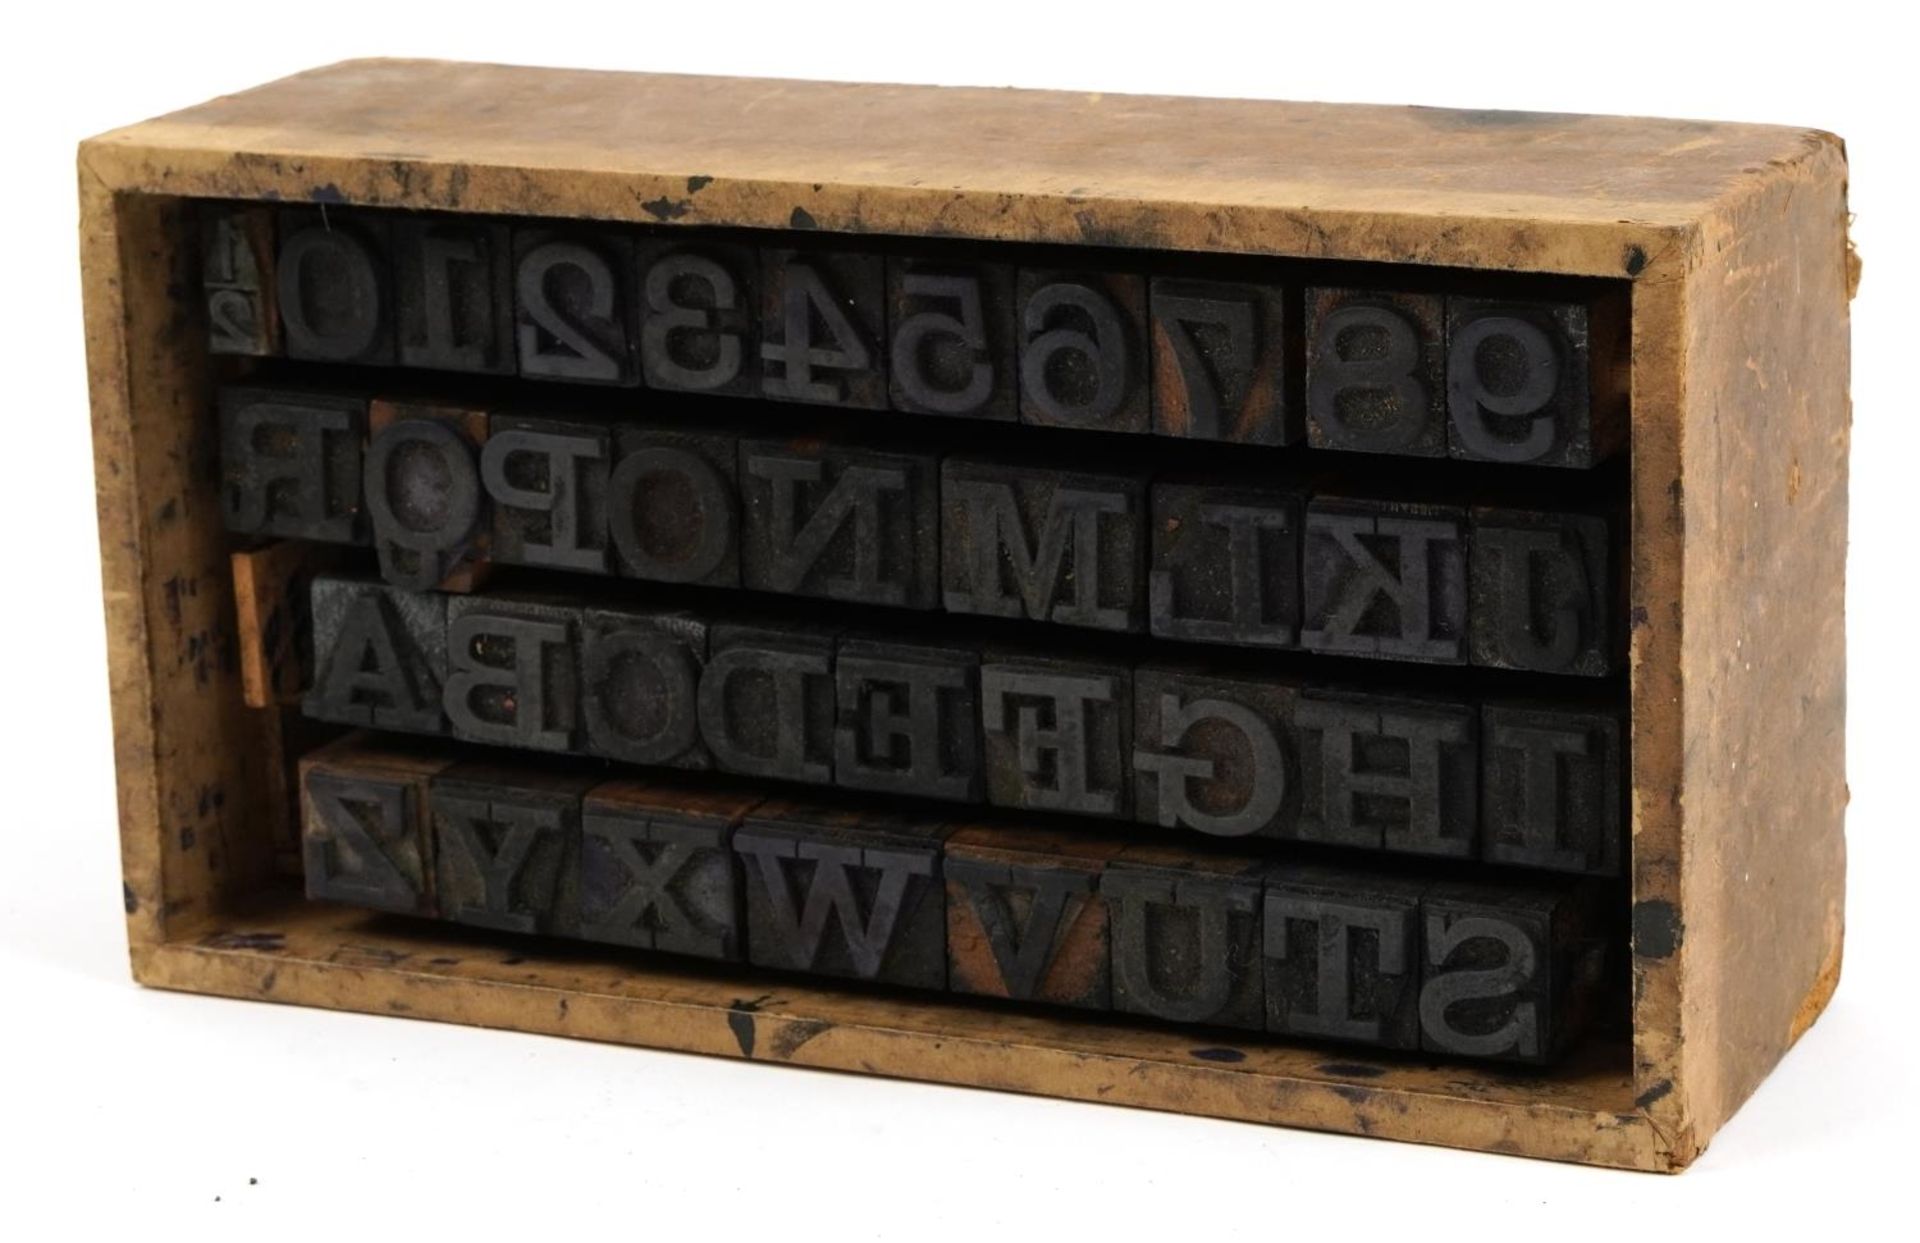 Set of vintage alphabet and numbers printer's blocks with fitted case : For further information on - Image 4 of 4